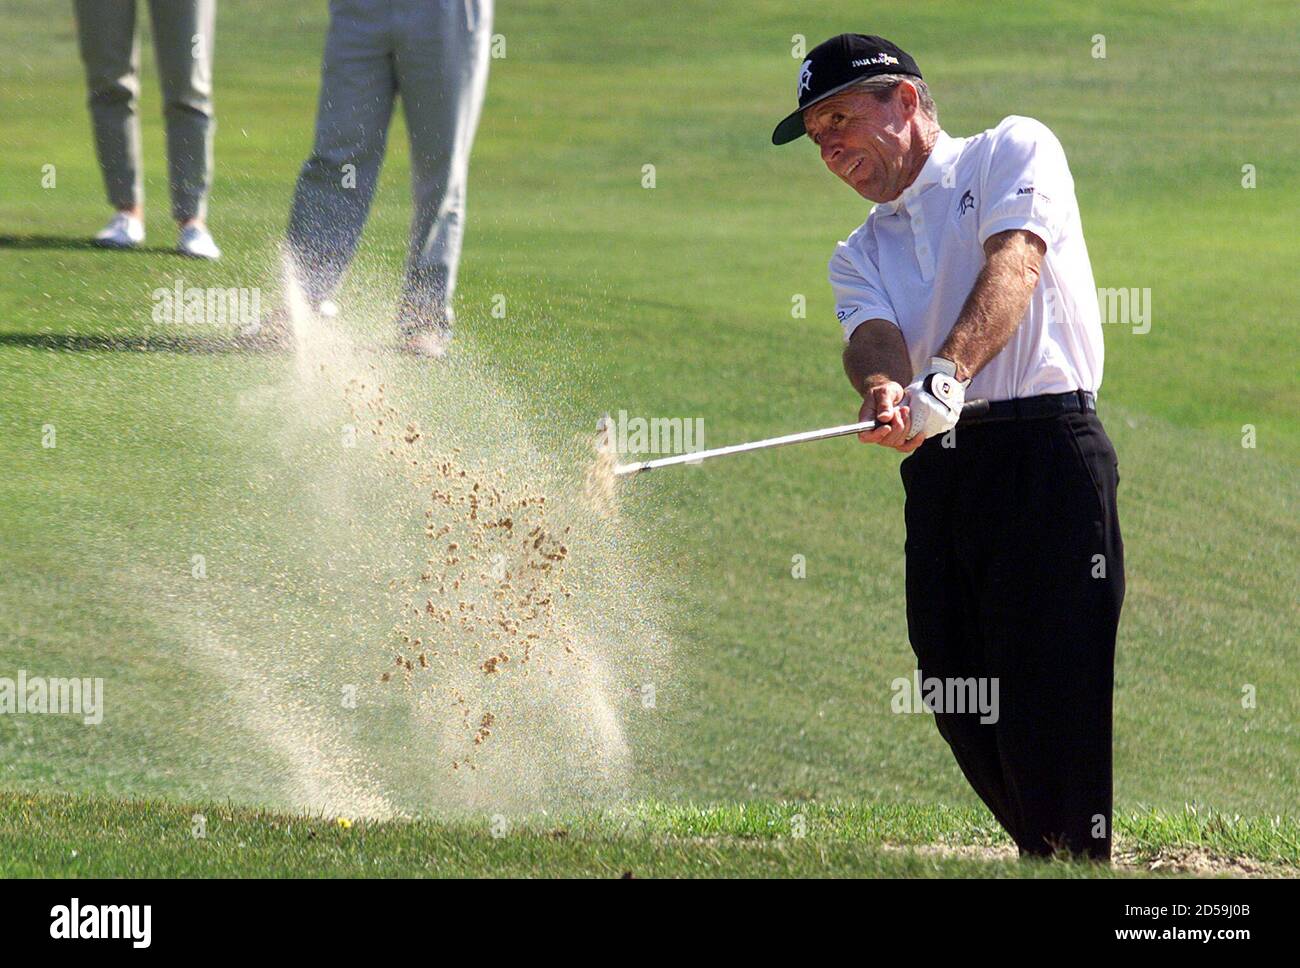 South African former golf star Gary Player hits the ball in a bunker as he  attends the Pro-celebrity golf tournament at the Monte Carlo golf club  September11. Professional golfers and celebrities participated